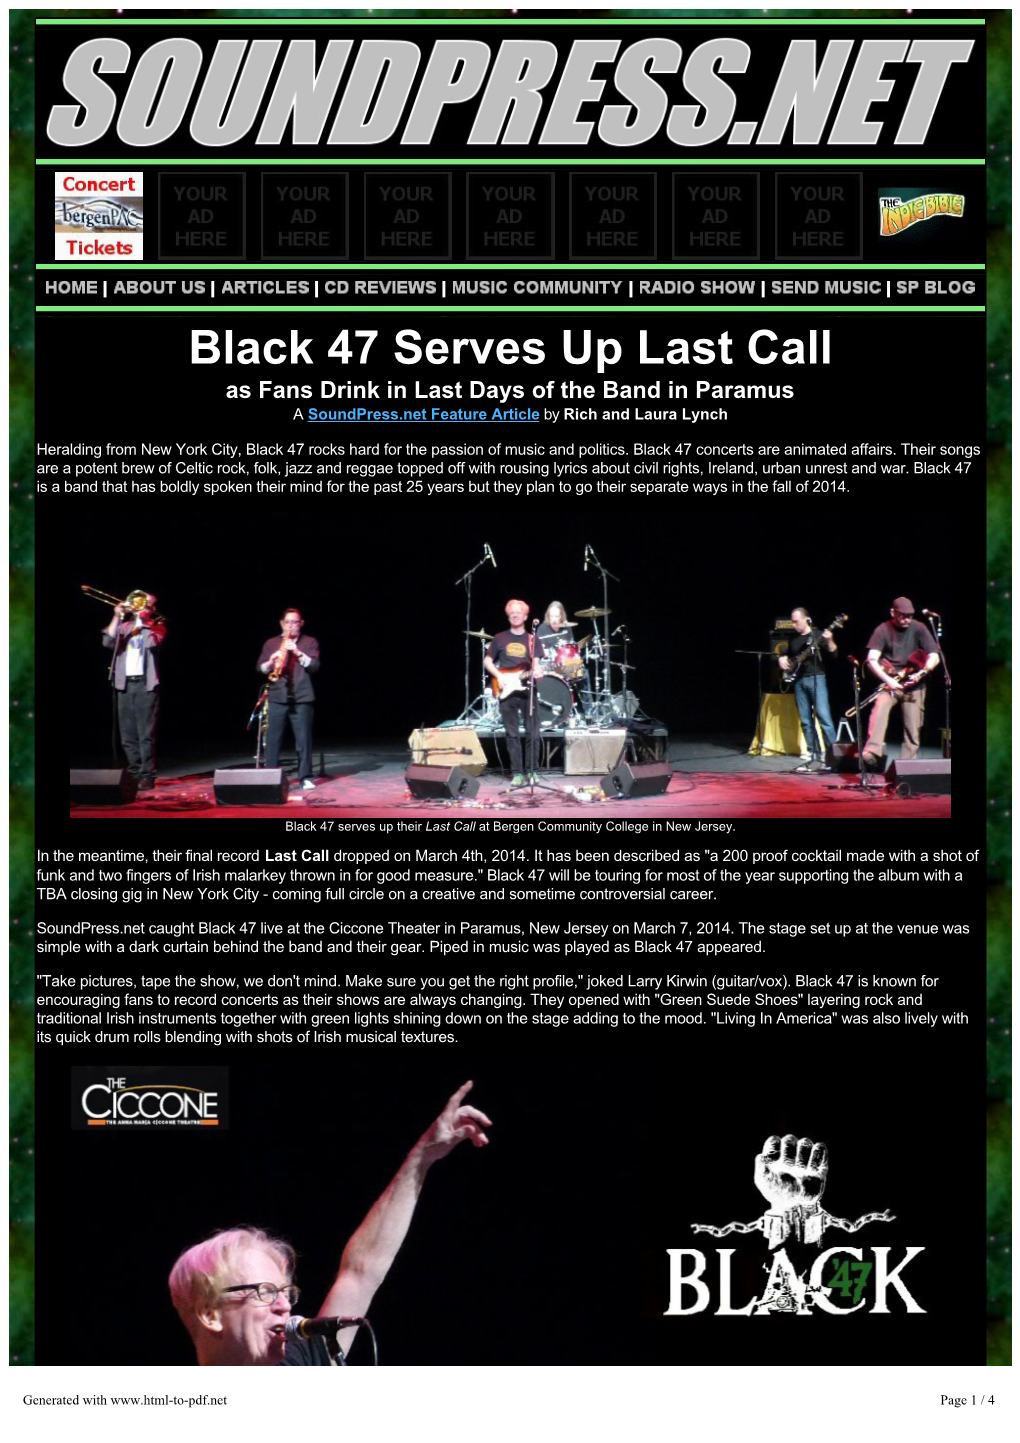 Black 47 Serves up Last Call As Fans Drink in Last Days of the Band in Paramus a Soundpress.Net Feature Article by Rich and Laura Lynch